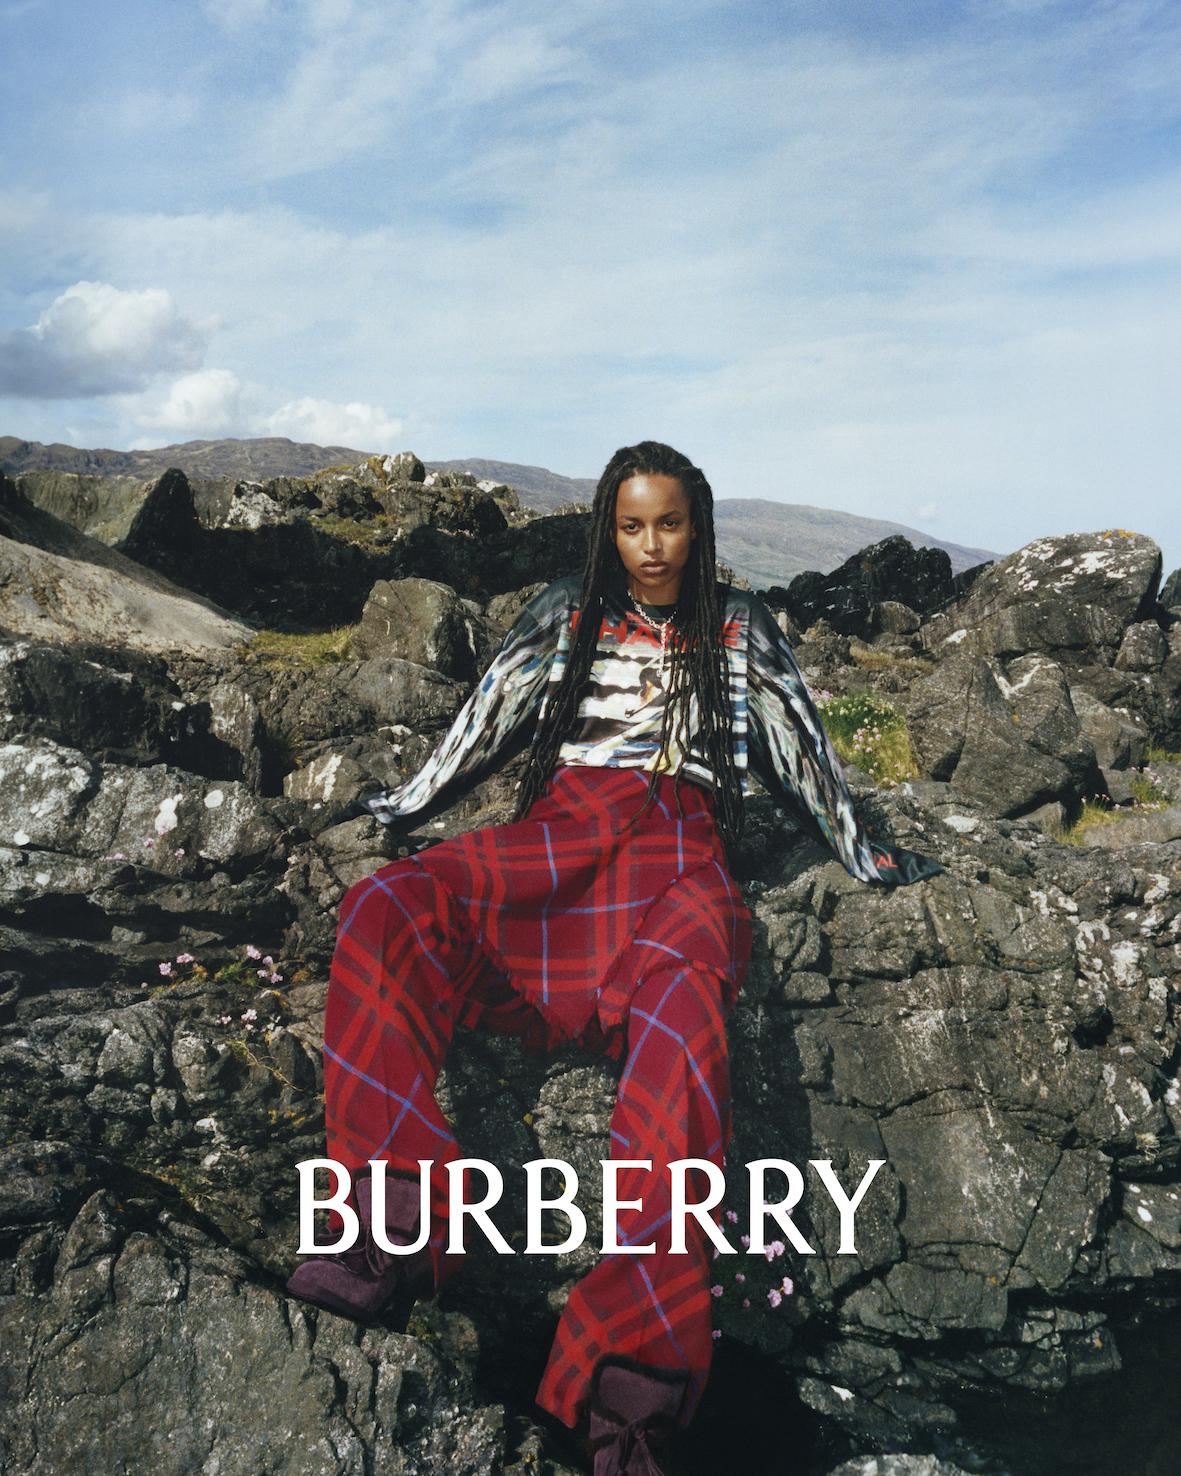 Burberry hits the great outdoors